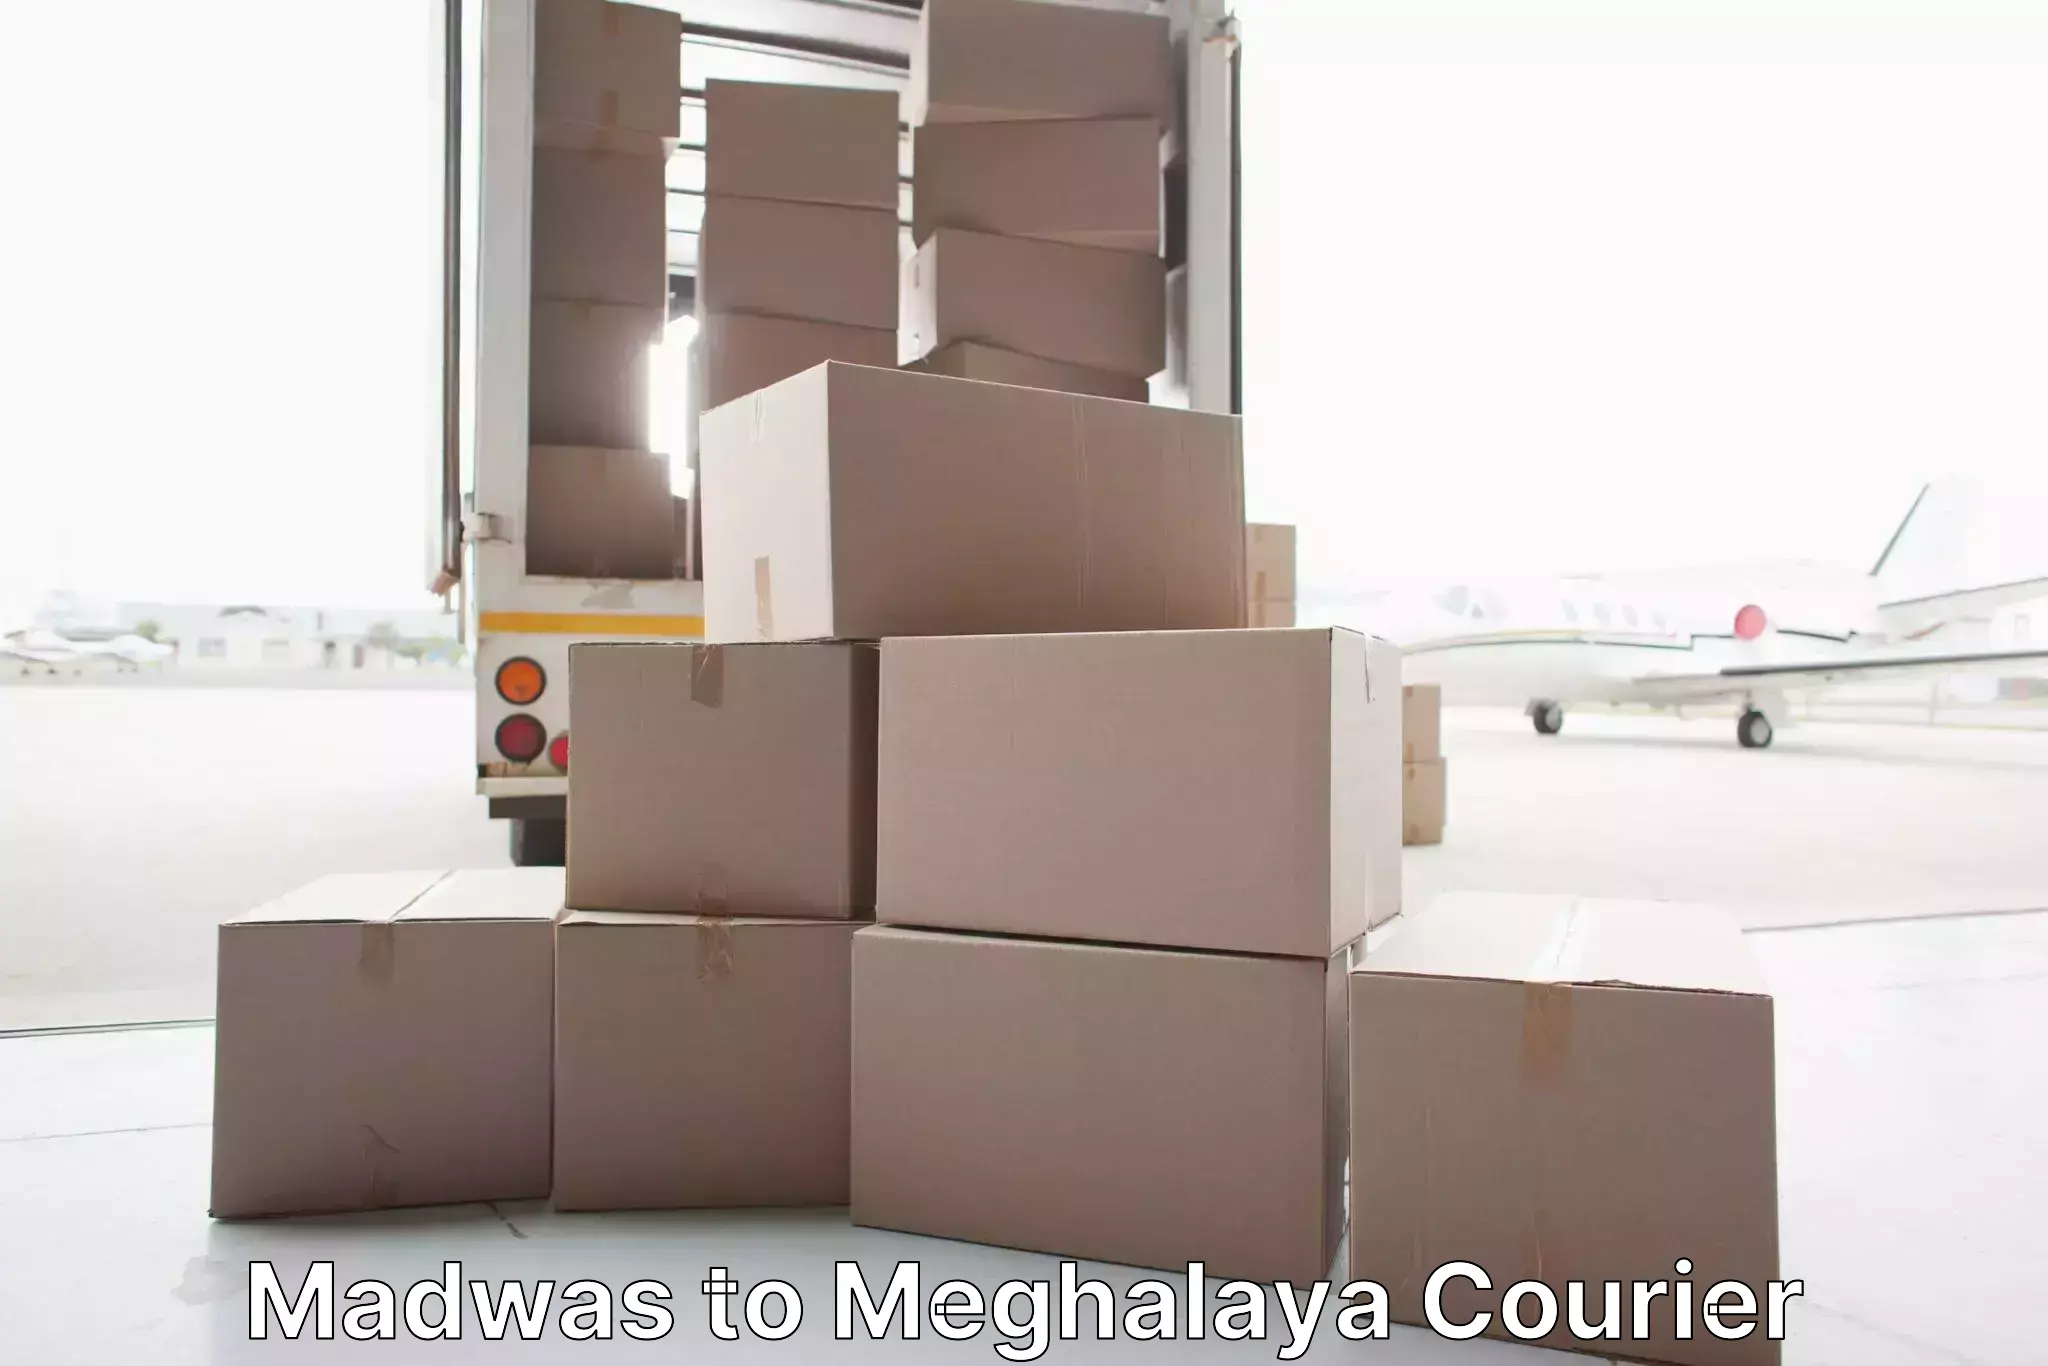 Furniture moving service in Madwas to Tura